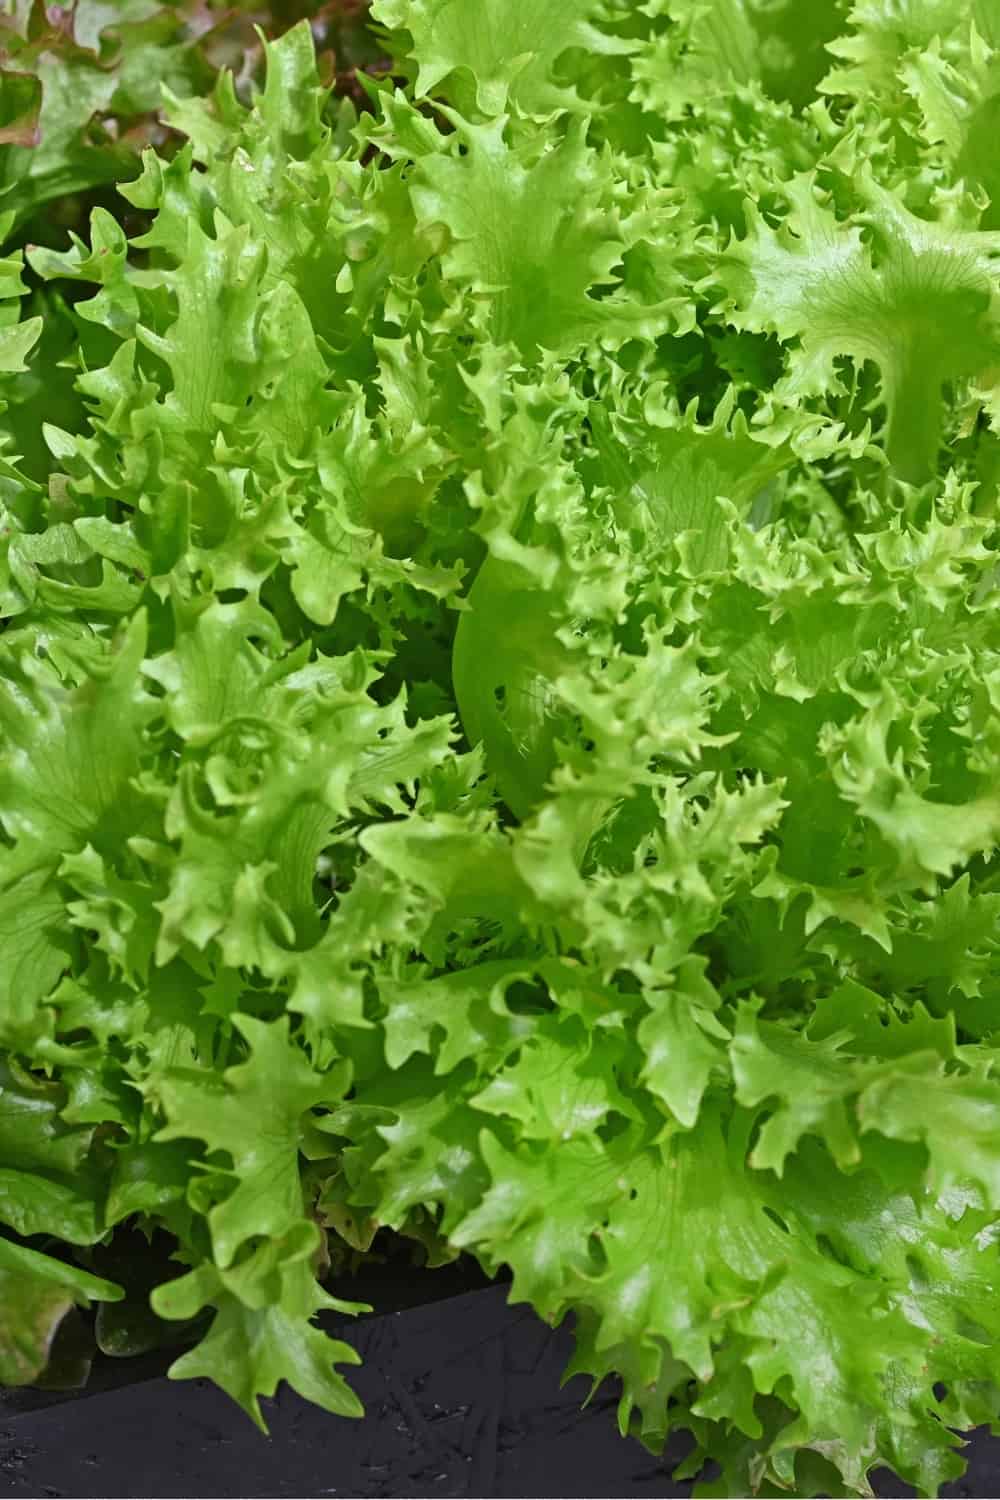 Closeup of an green Frisee lettuce ready to eat